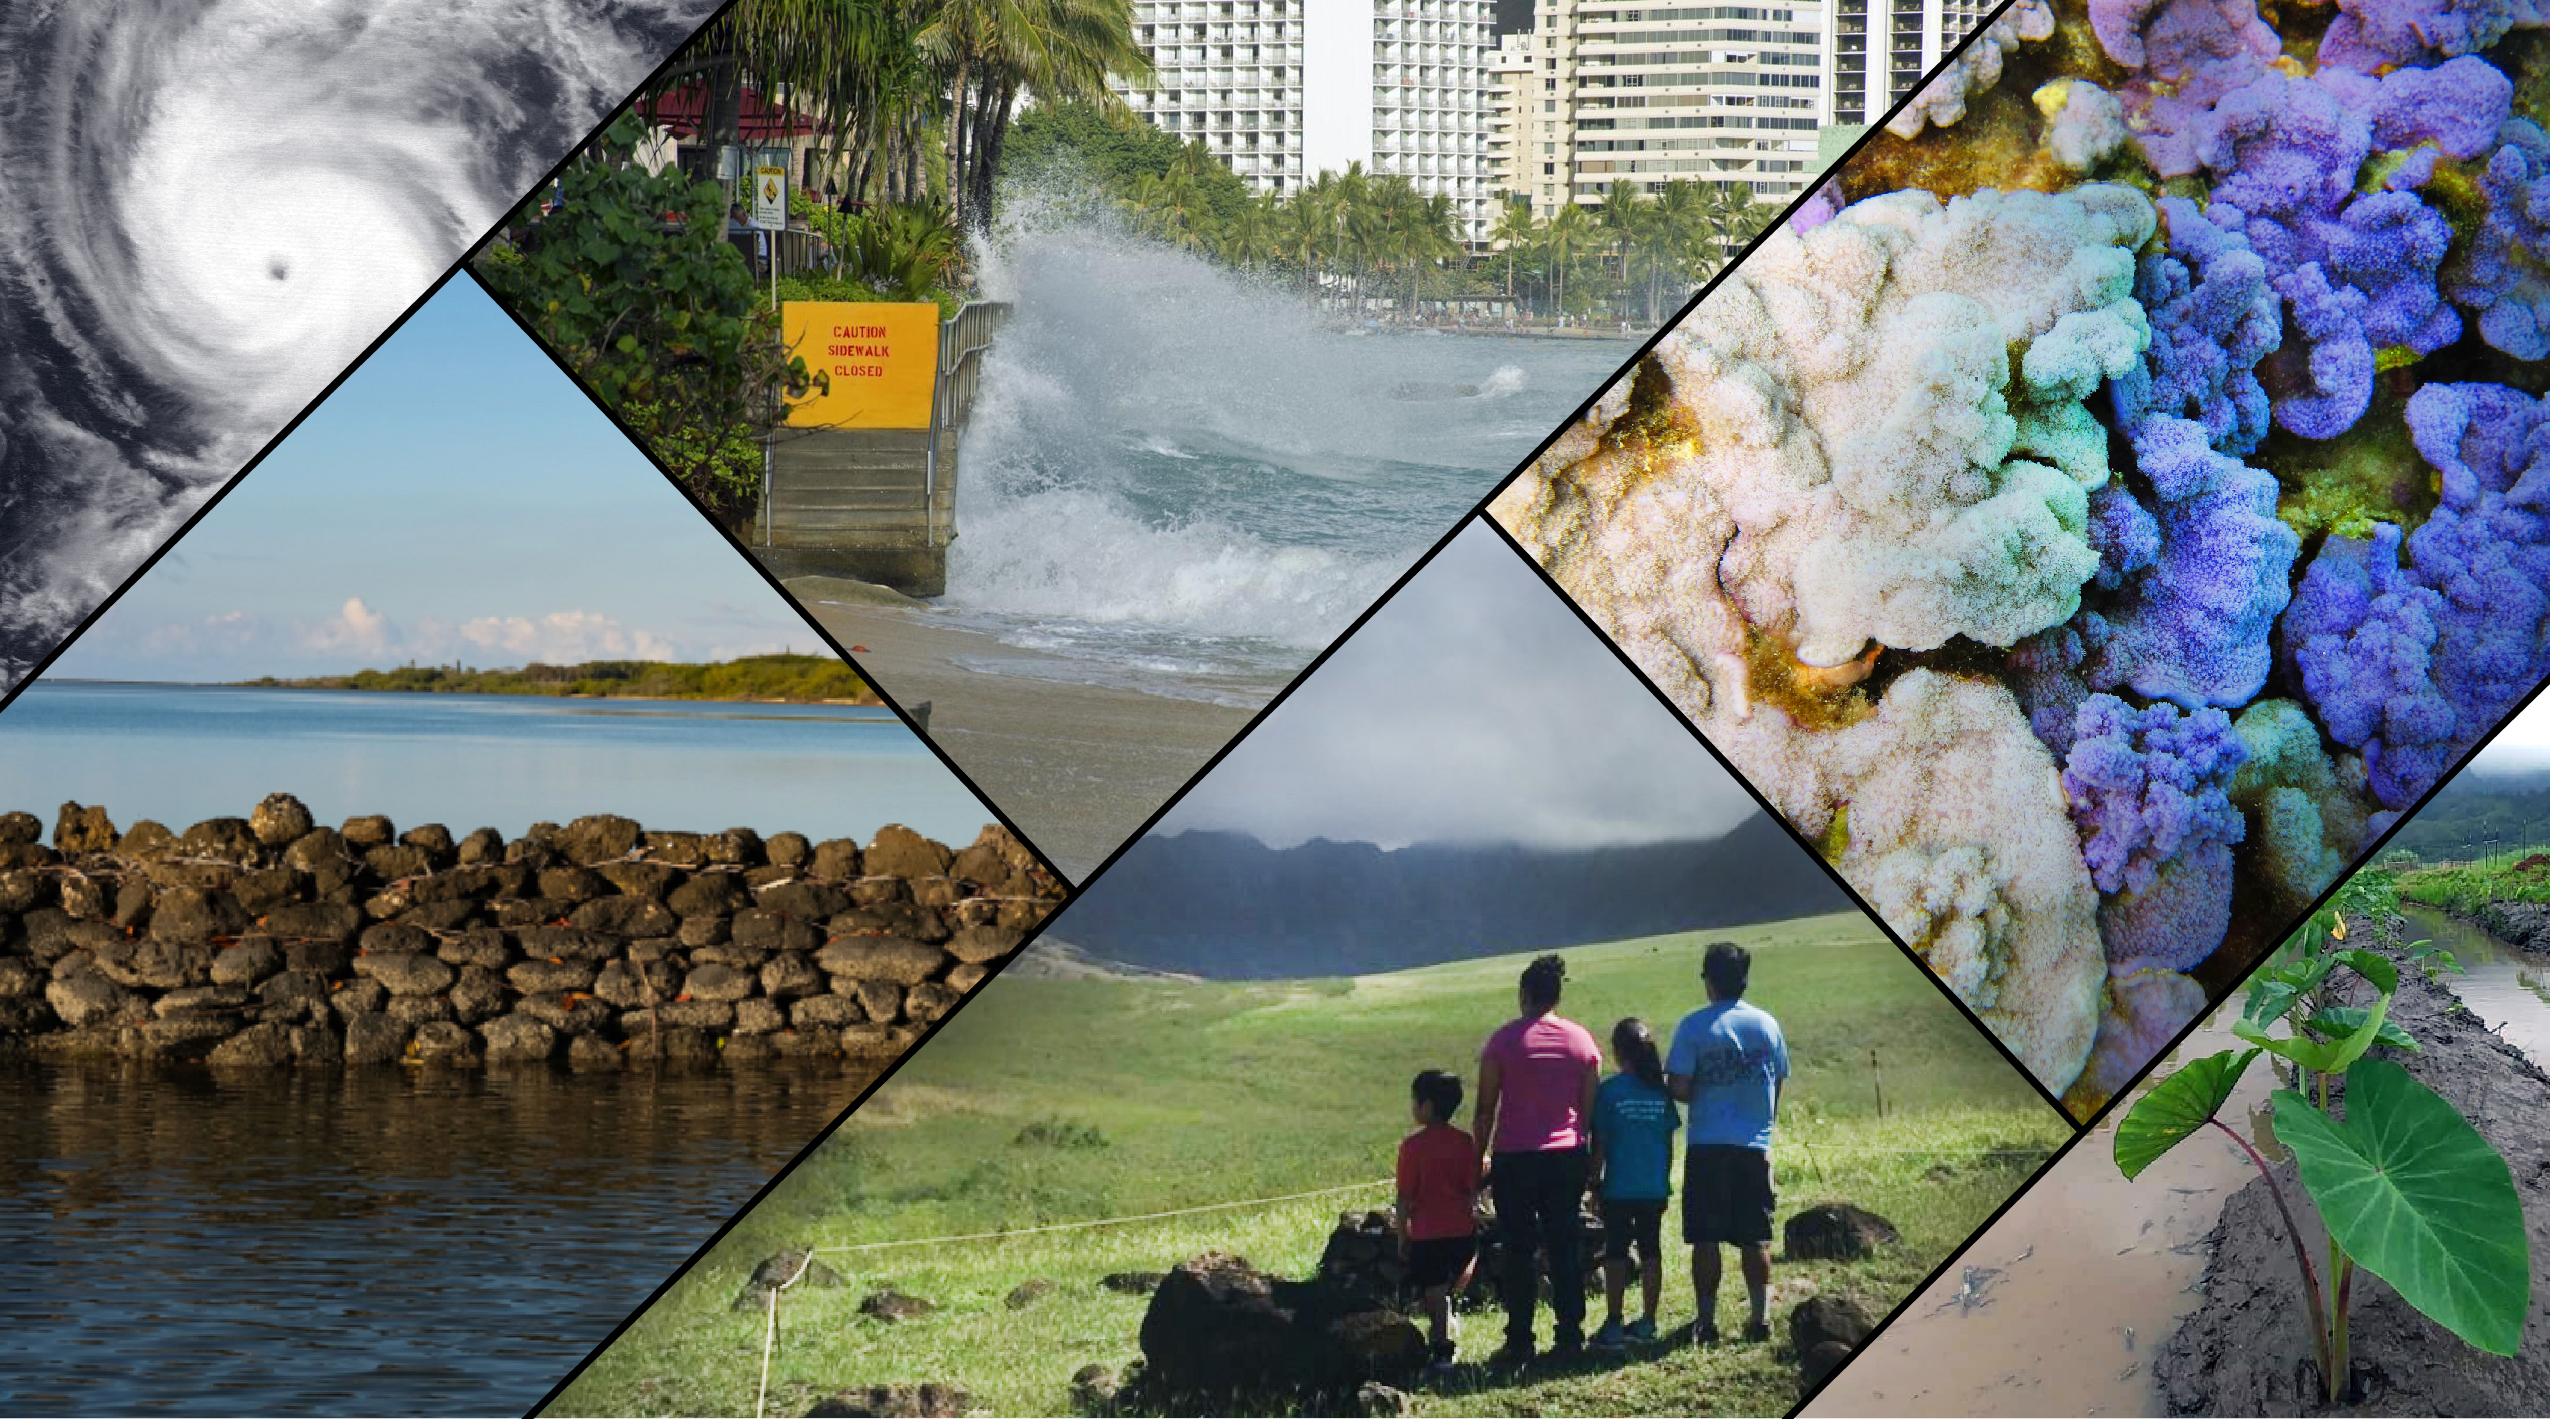 Collage showing climate-related events and scenes. (Image credit: NOAA)